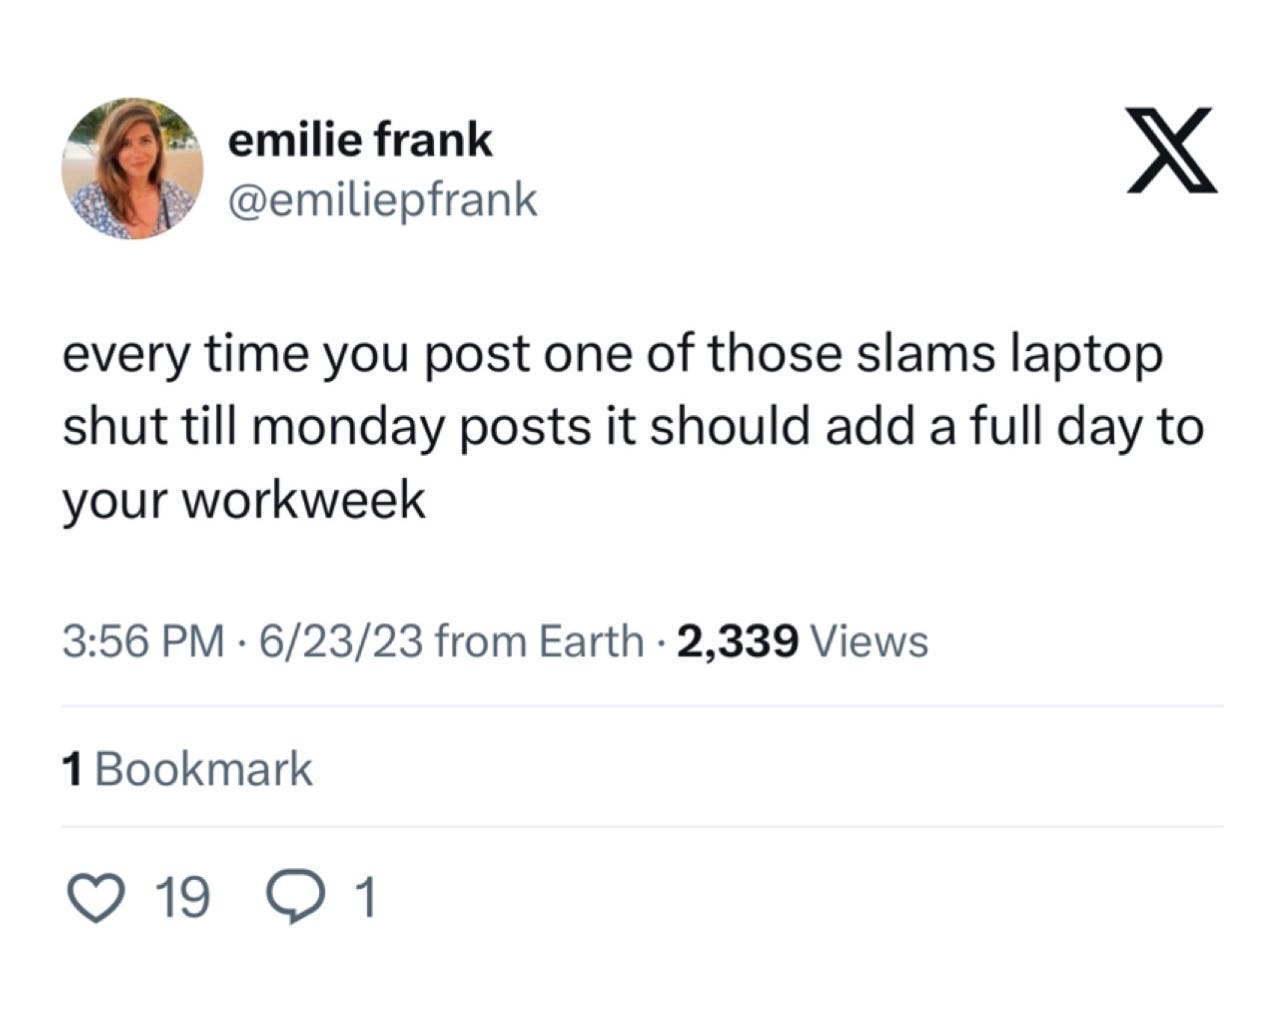 emilie frank (@emiliepfrank): every time you post one of those slams laptop shut till monday posts it should add a full day to your workweek